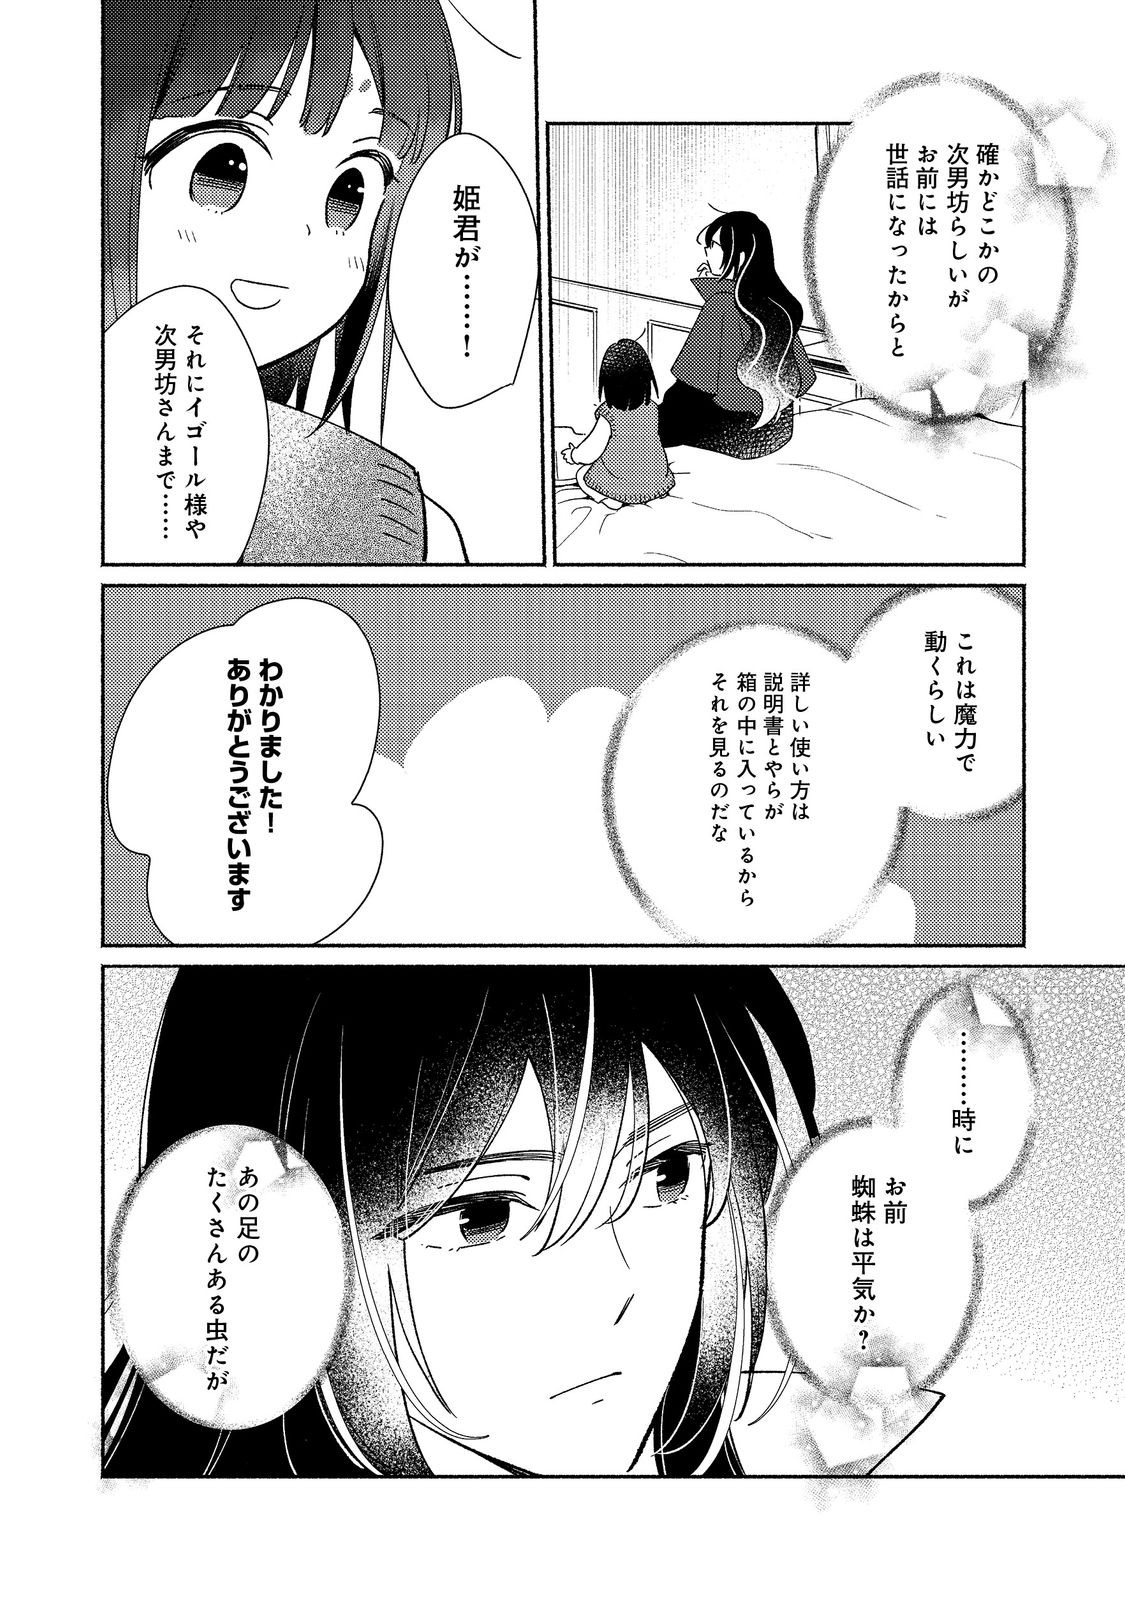 I’m the White Pig Nobleman 第26.2話 - Page 15